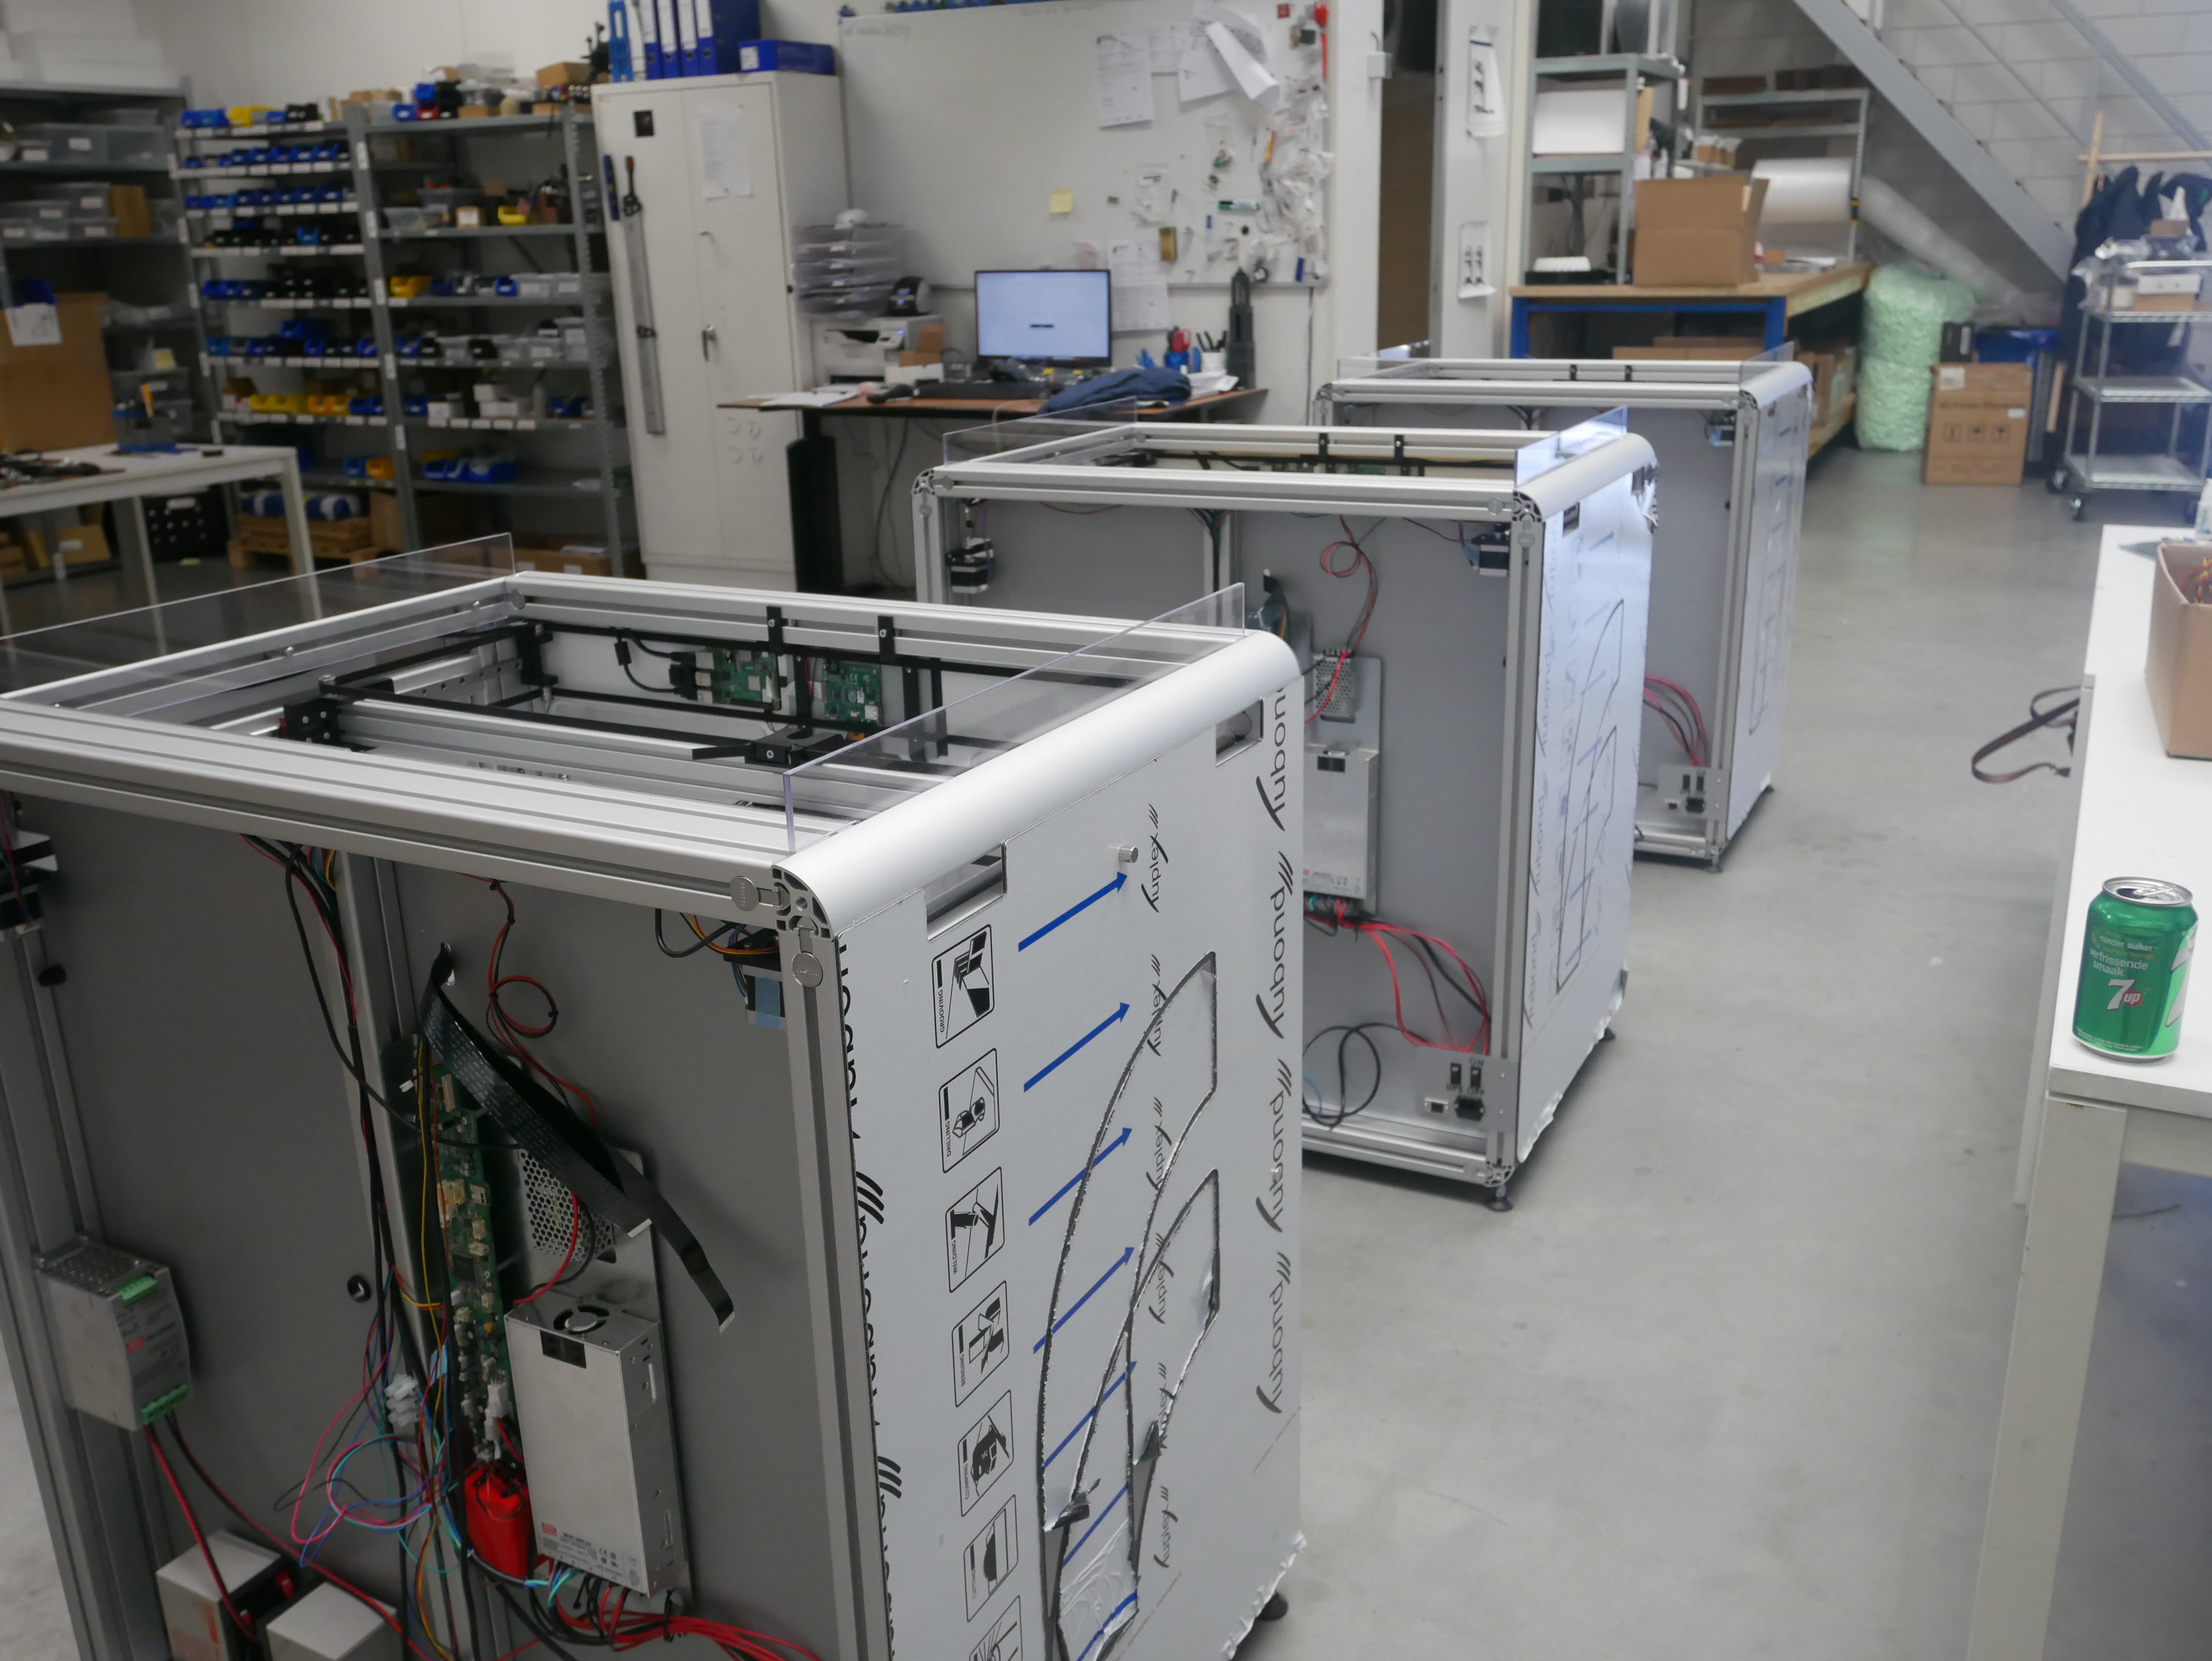 PRO L systems to be shipped out at the FELIXprinters facility. Photo by Tia Vialva.